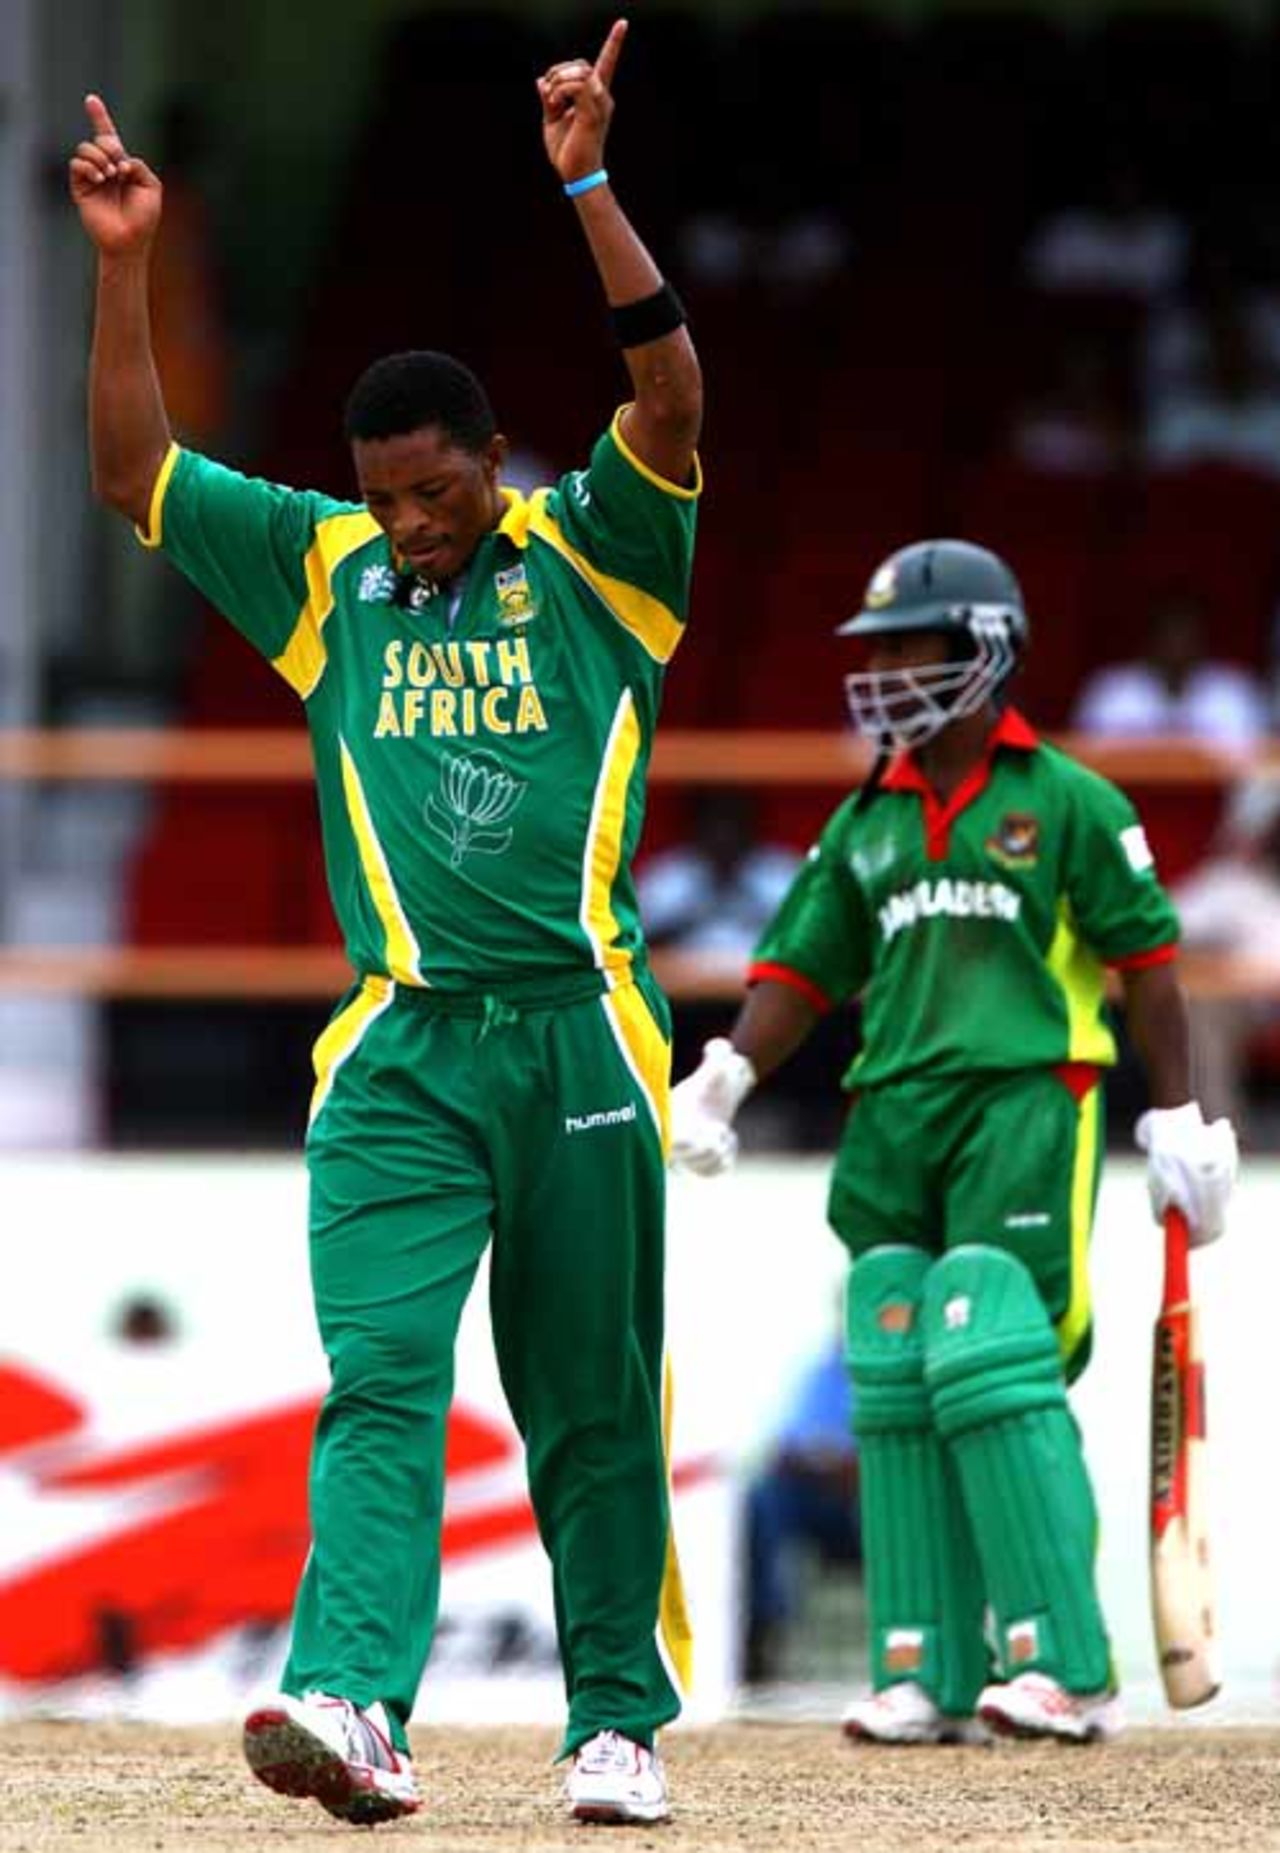 It's a wicket at last for Makhaya Ntini as he dismisses Aftab Ahmed for 35, Bangladesh vs South Africa, Super Eights, Guyana, April 7, 2007